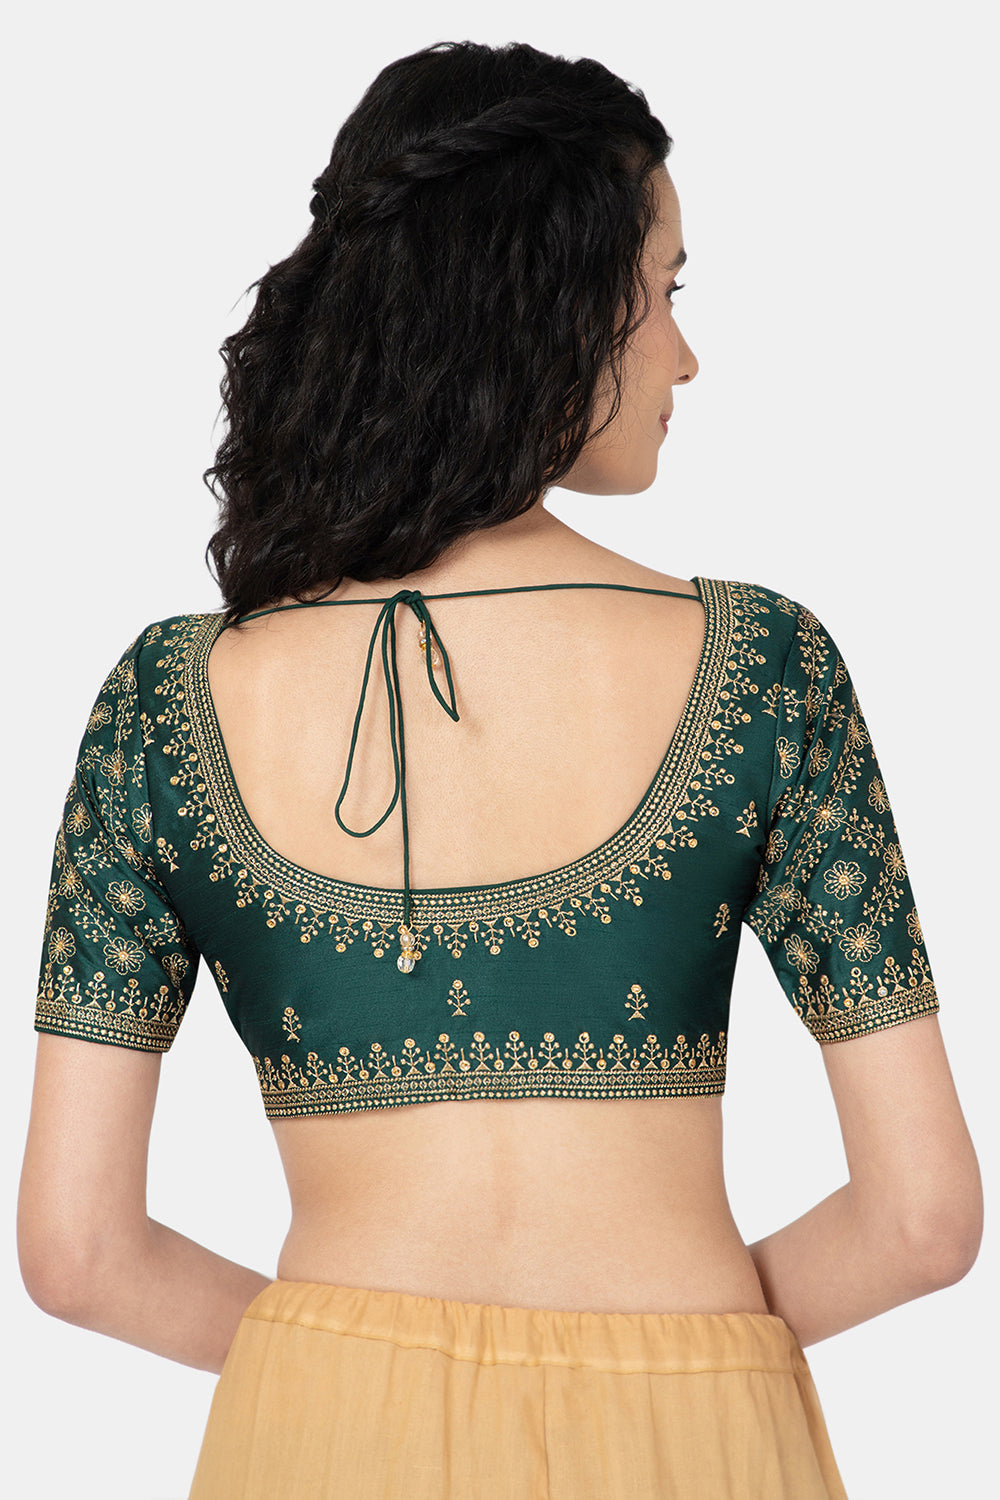 Naidu Hall Ethnic Saree Blouse with Round Neck Elbow Sleeves - Bottle Green